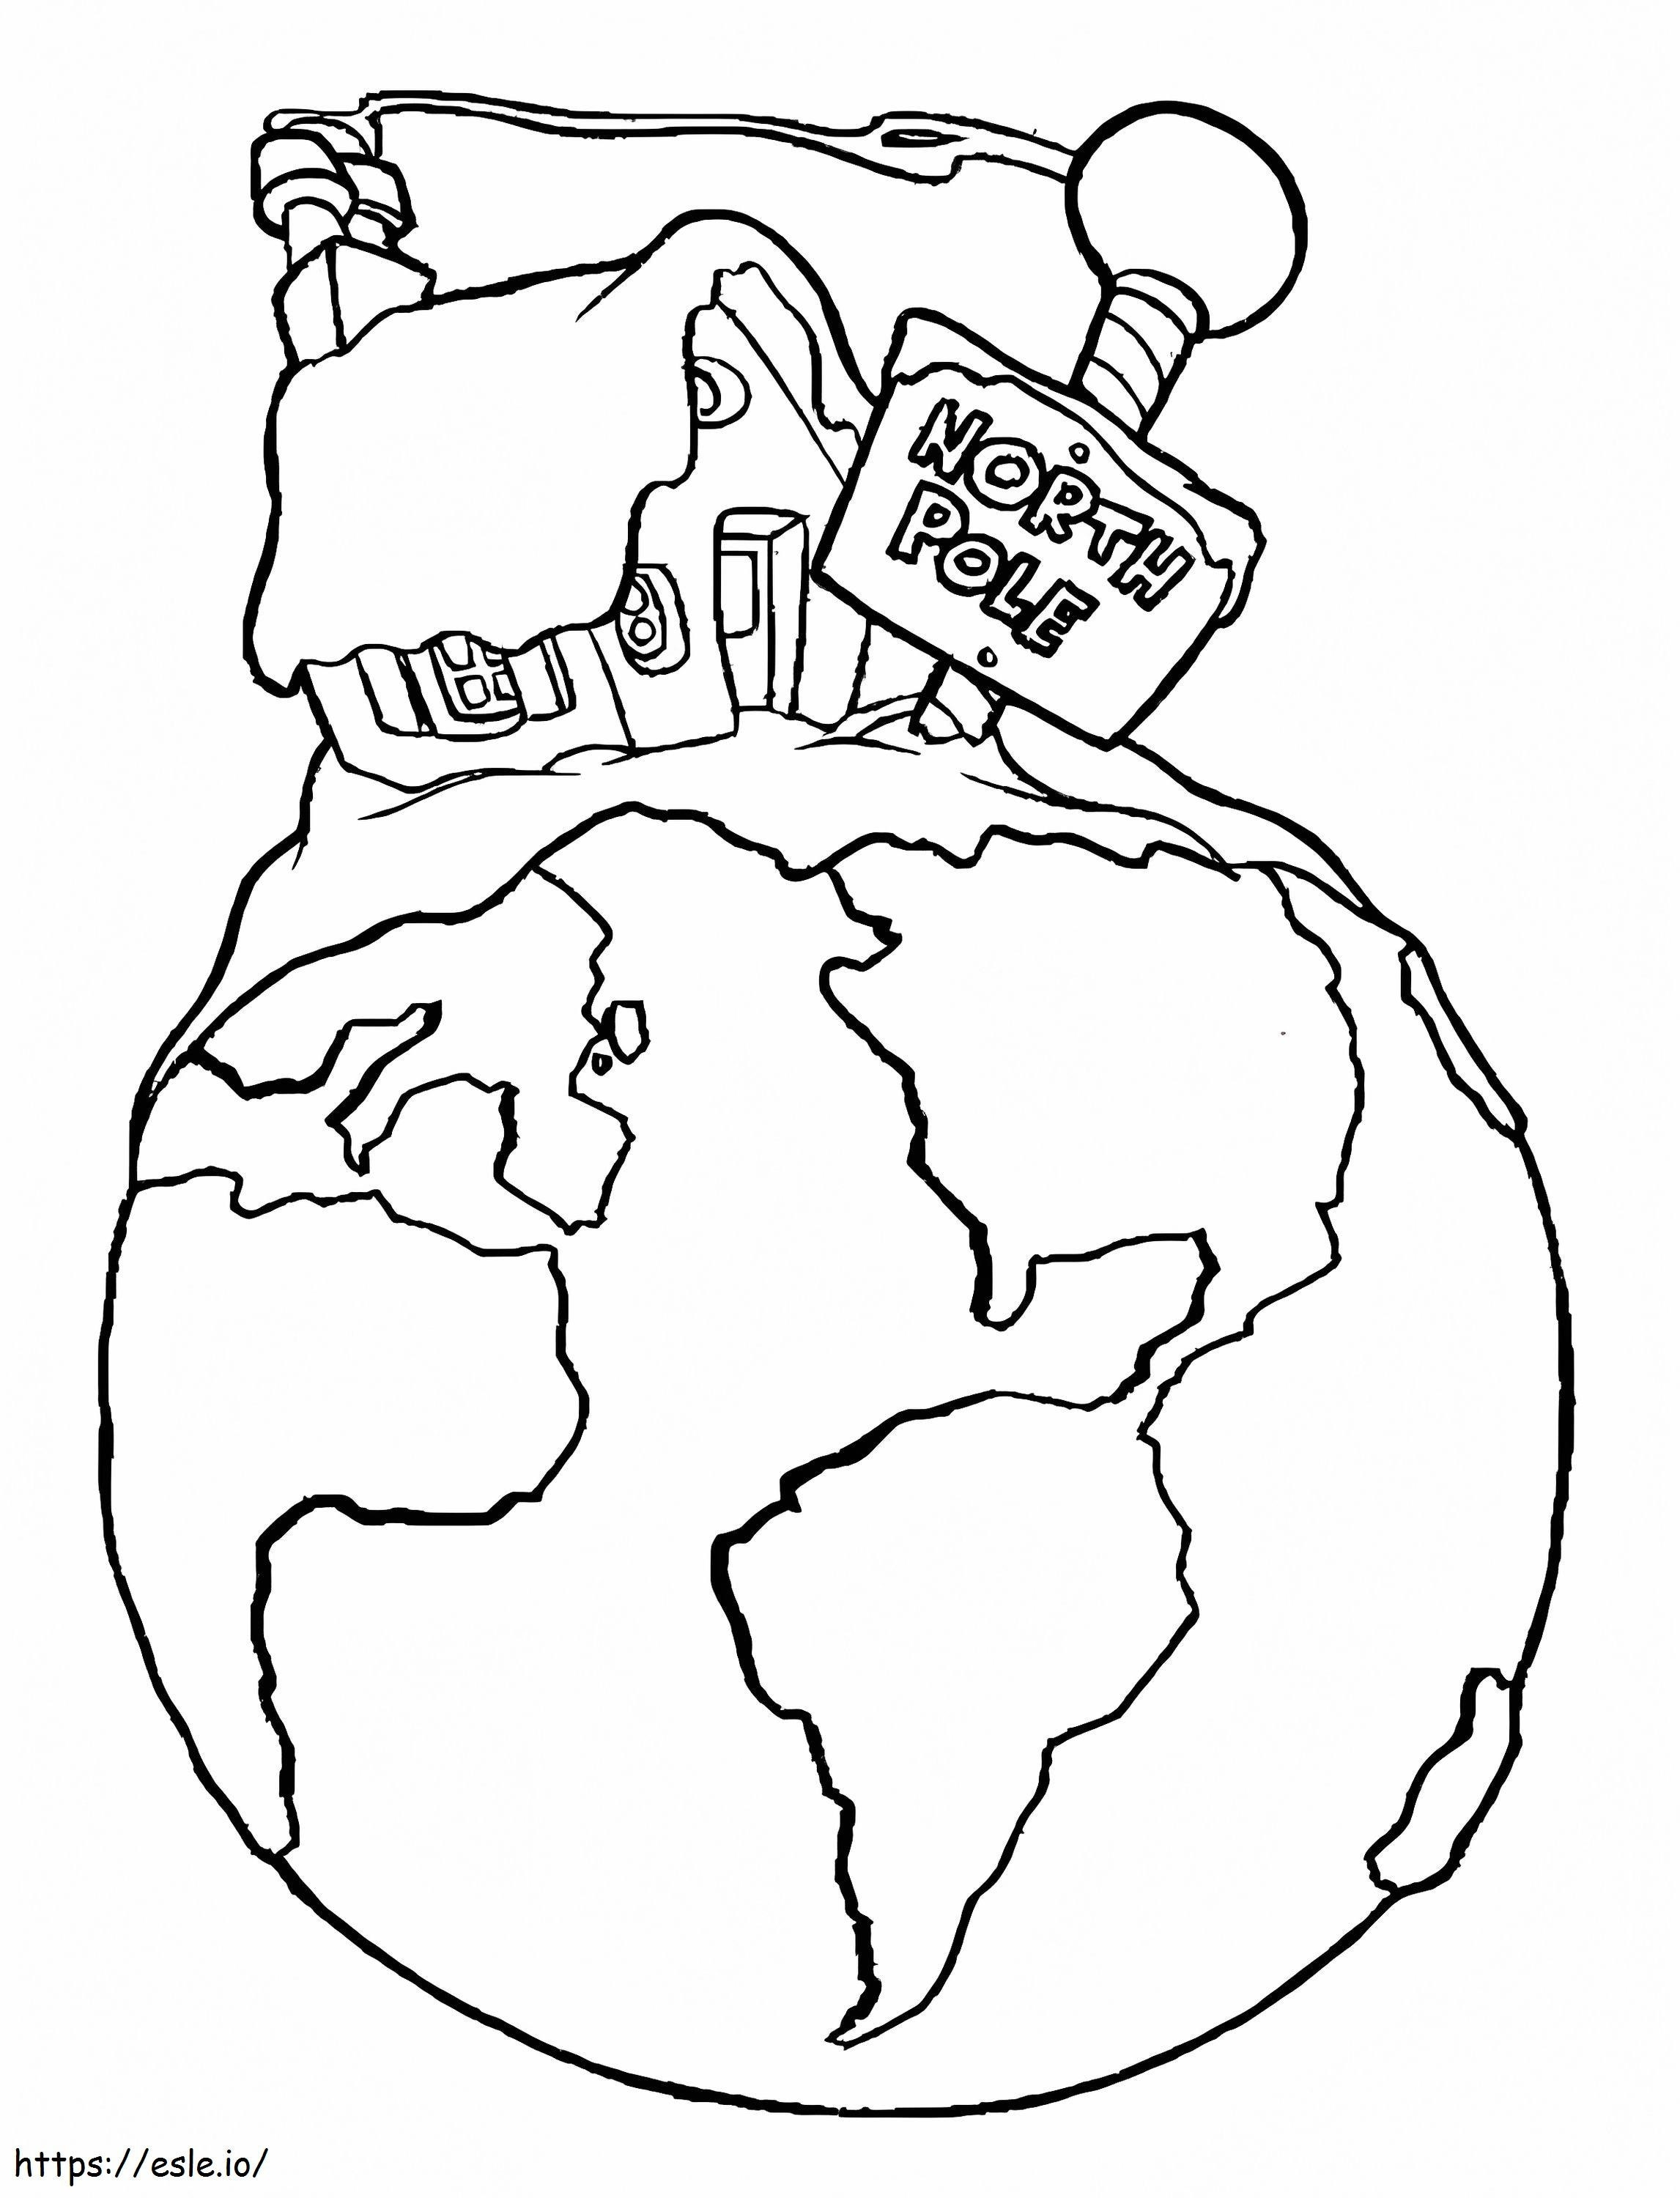 North Pole coloring page